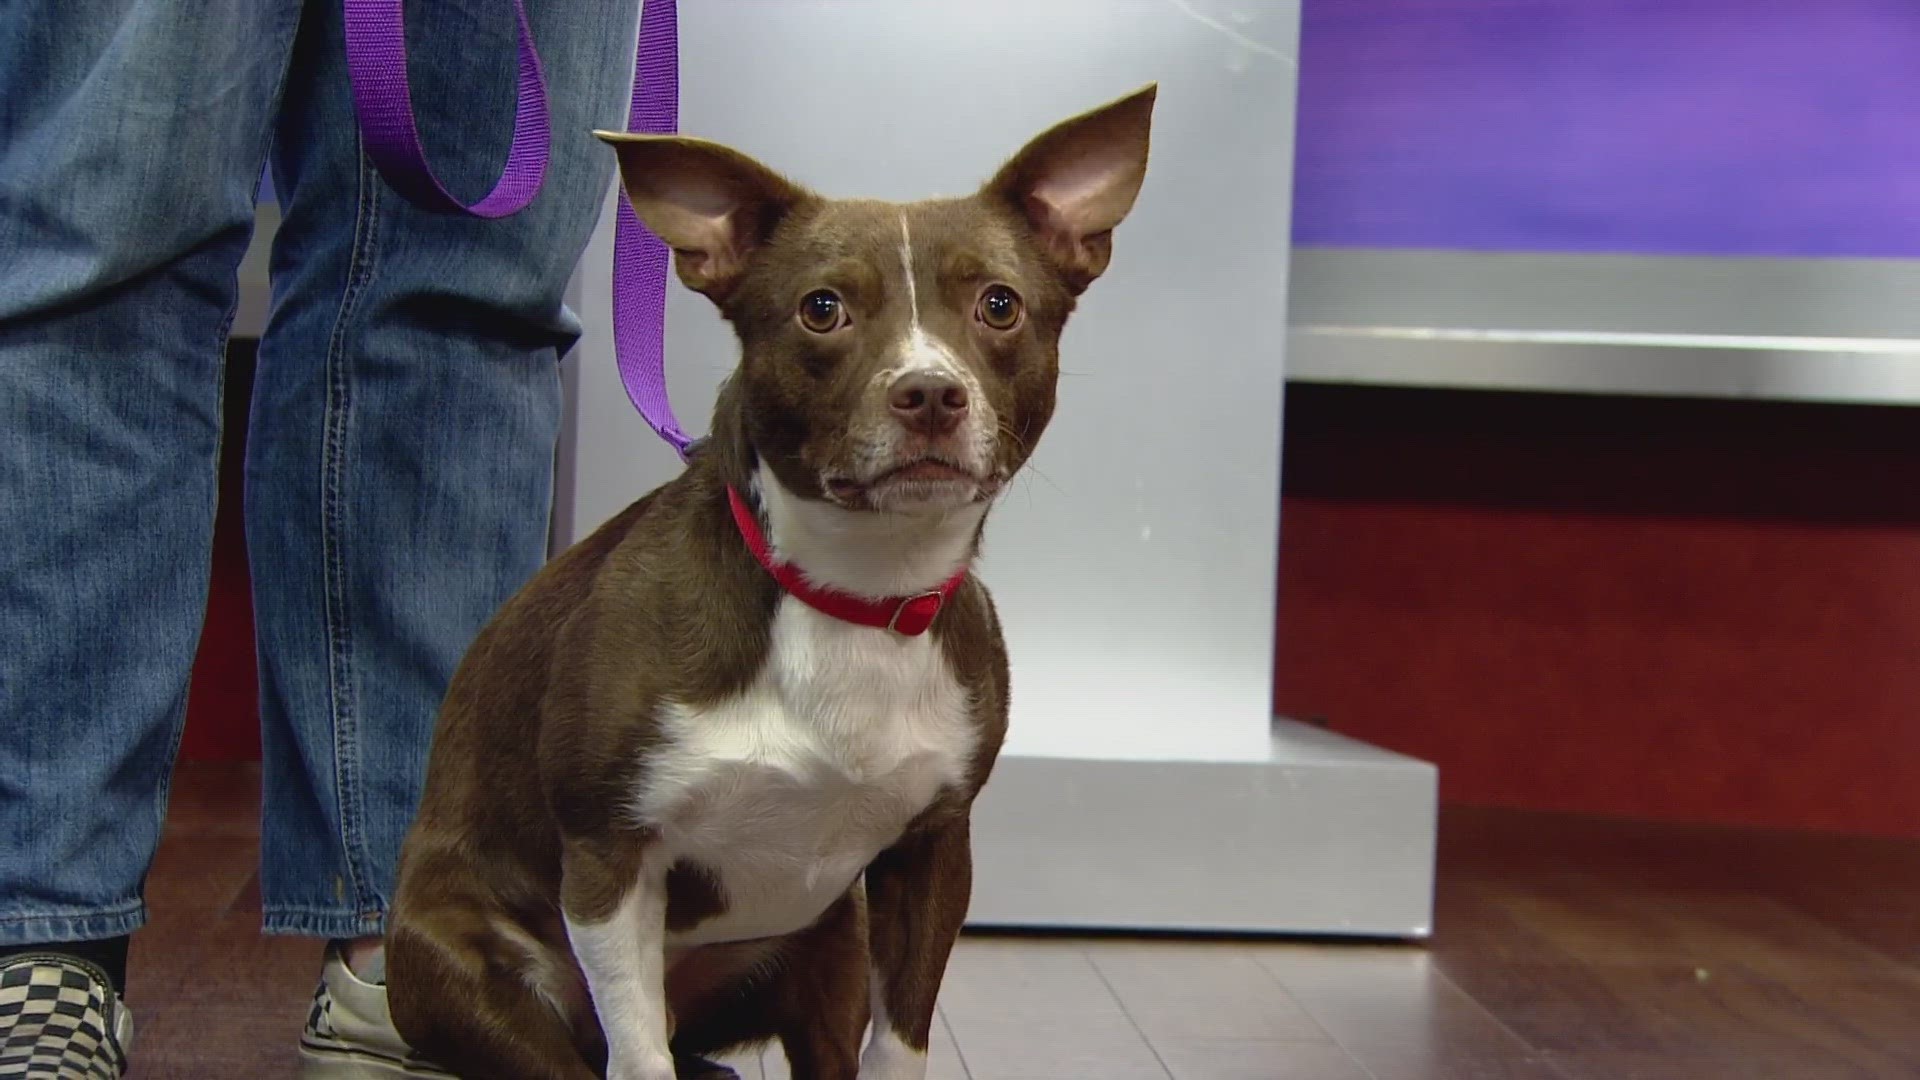 Louie is 3-years-old, loves carpet and is looking for a forever home!